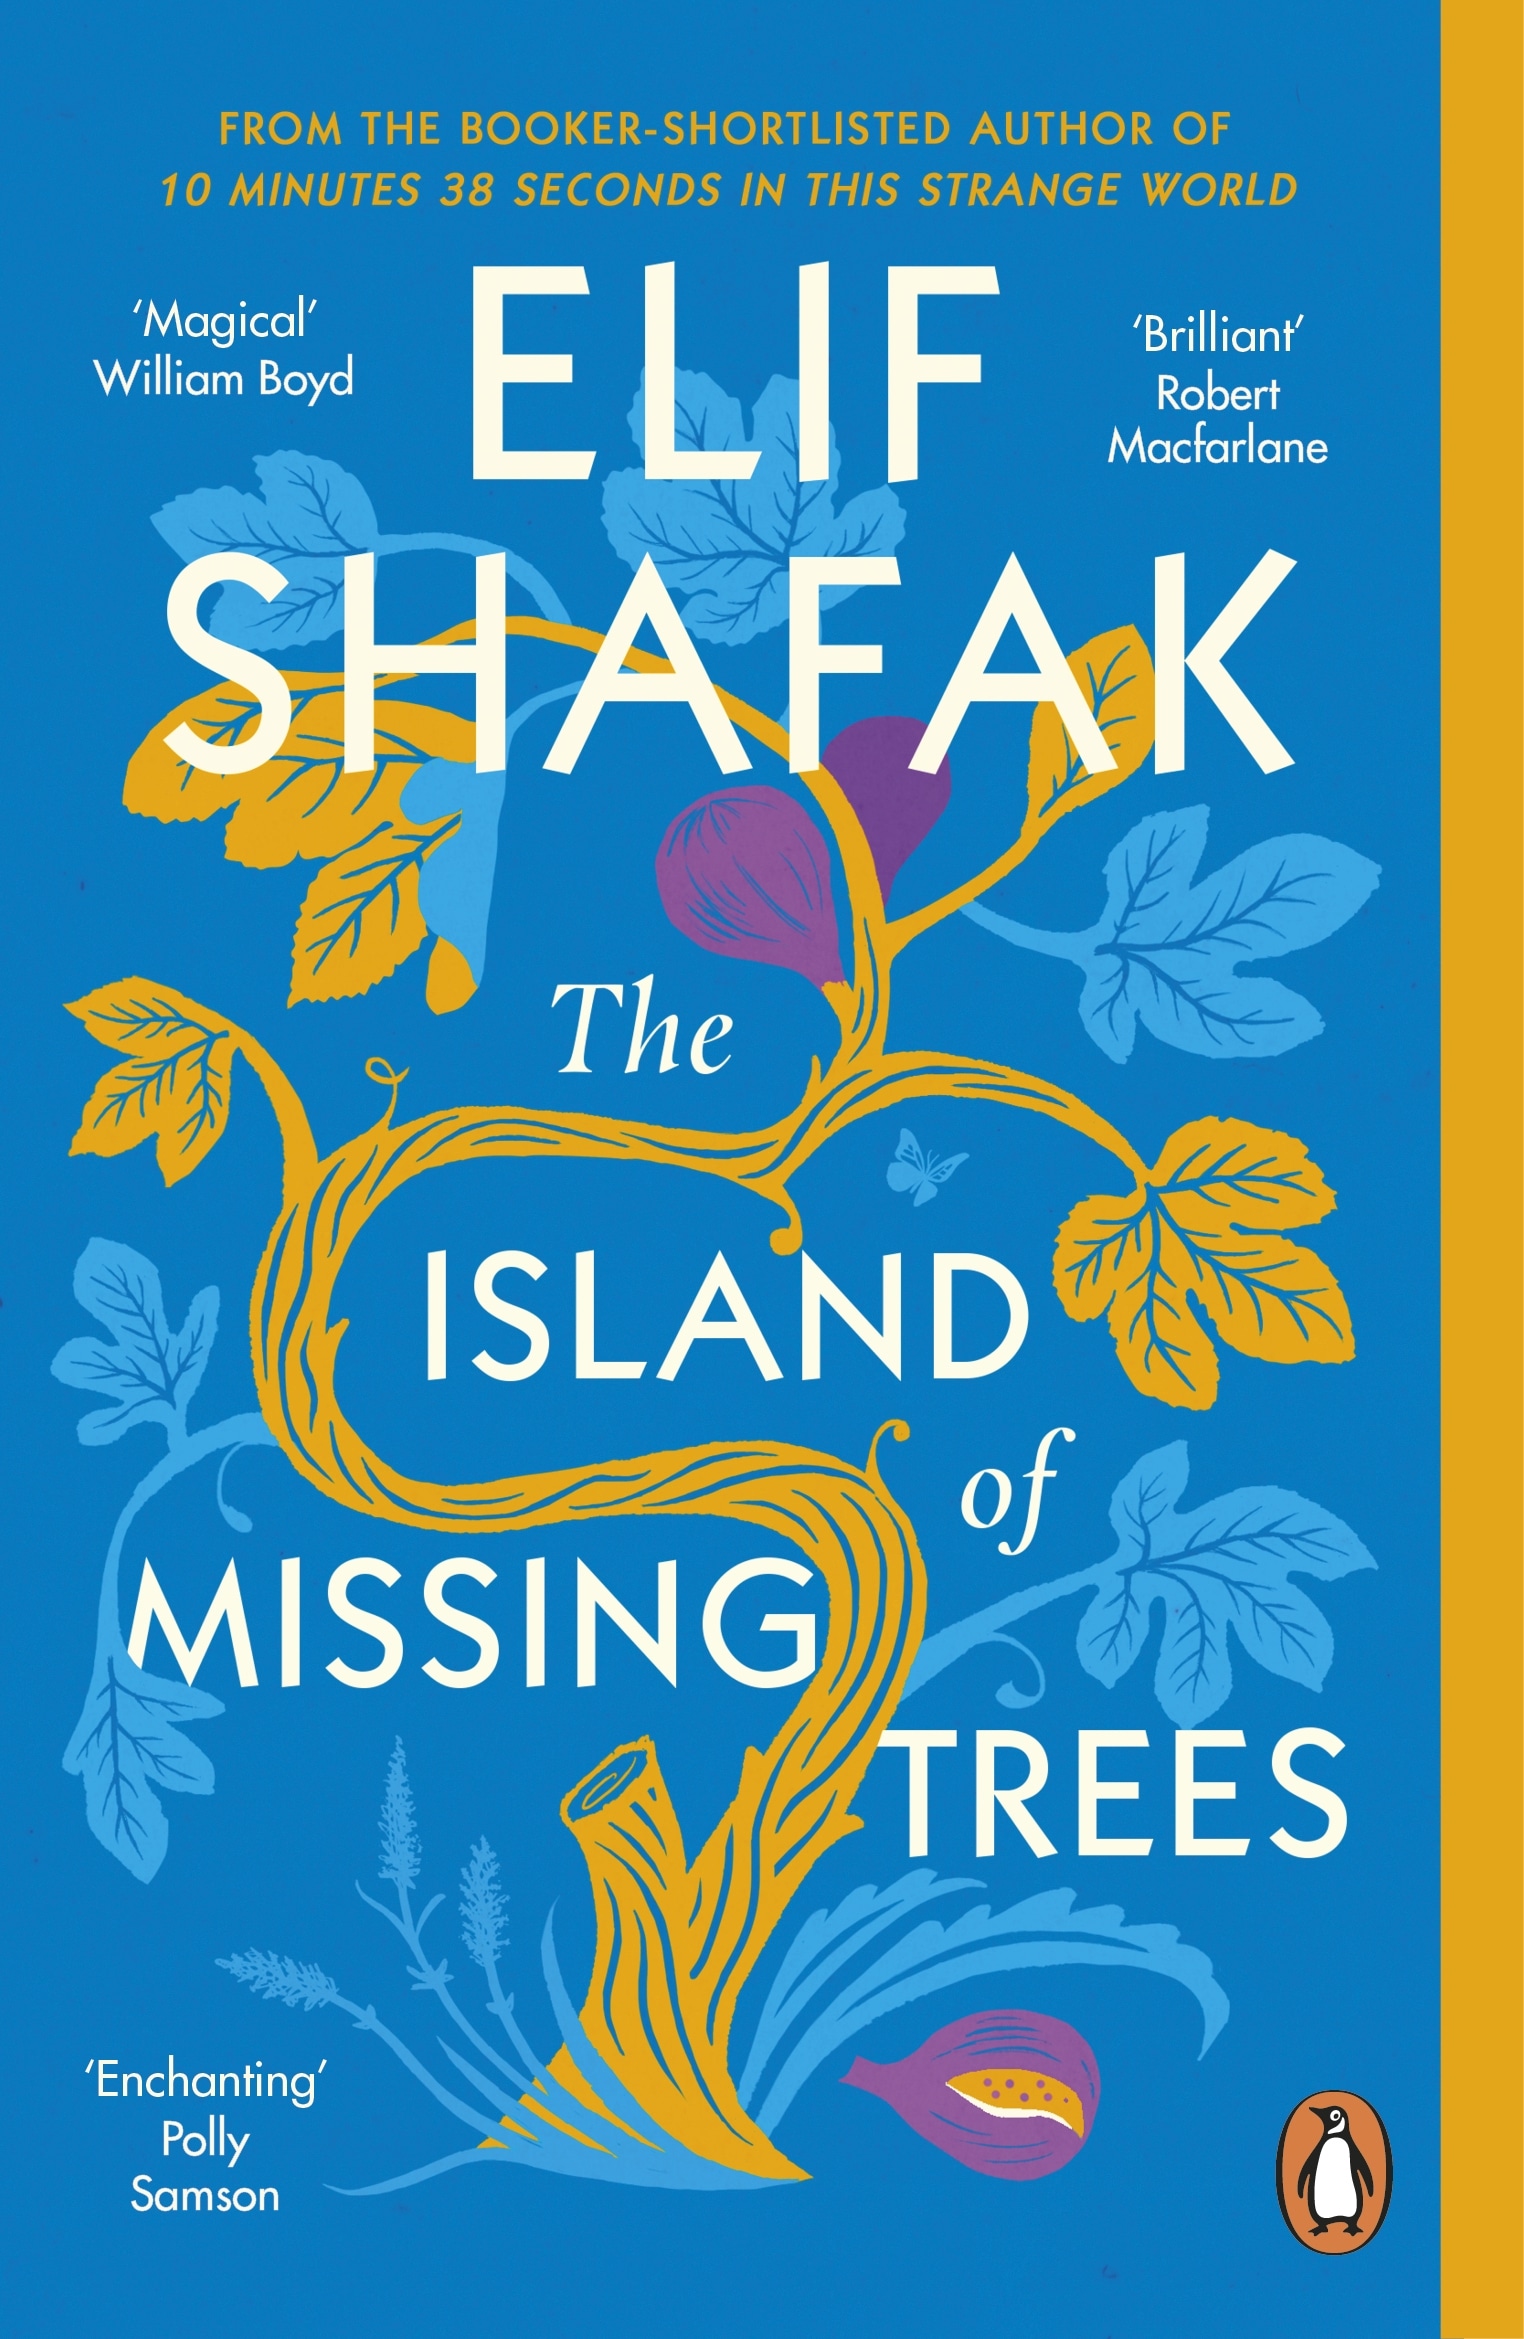 Book “The Island of Missing Trees” by Elif Shafak — April 28, 2022